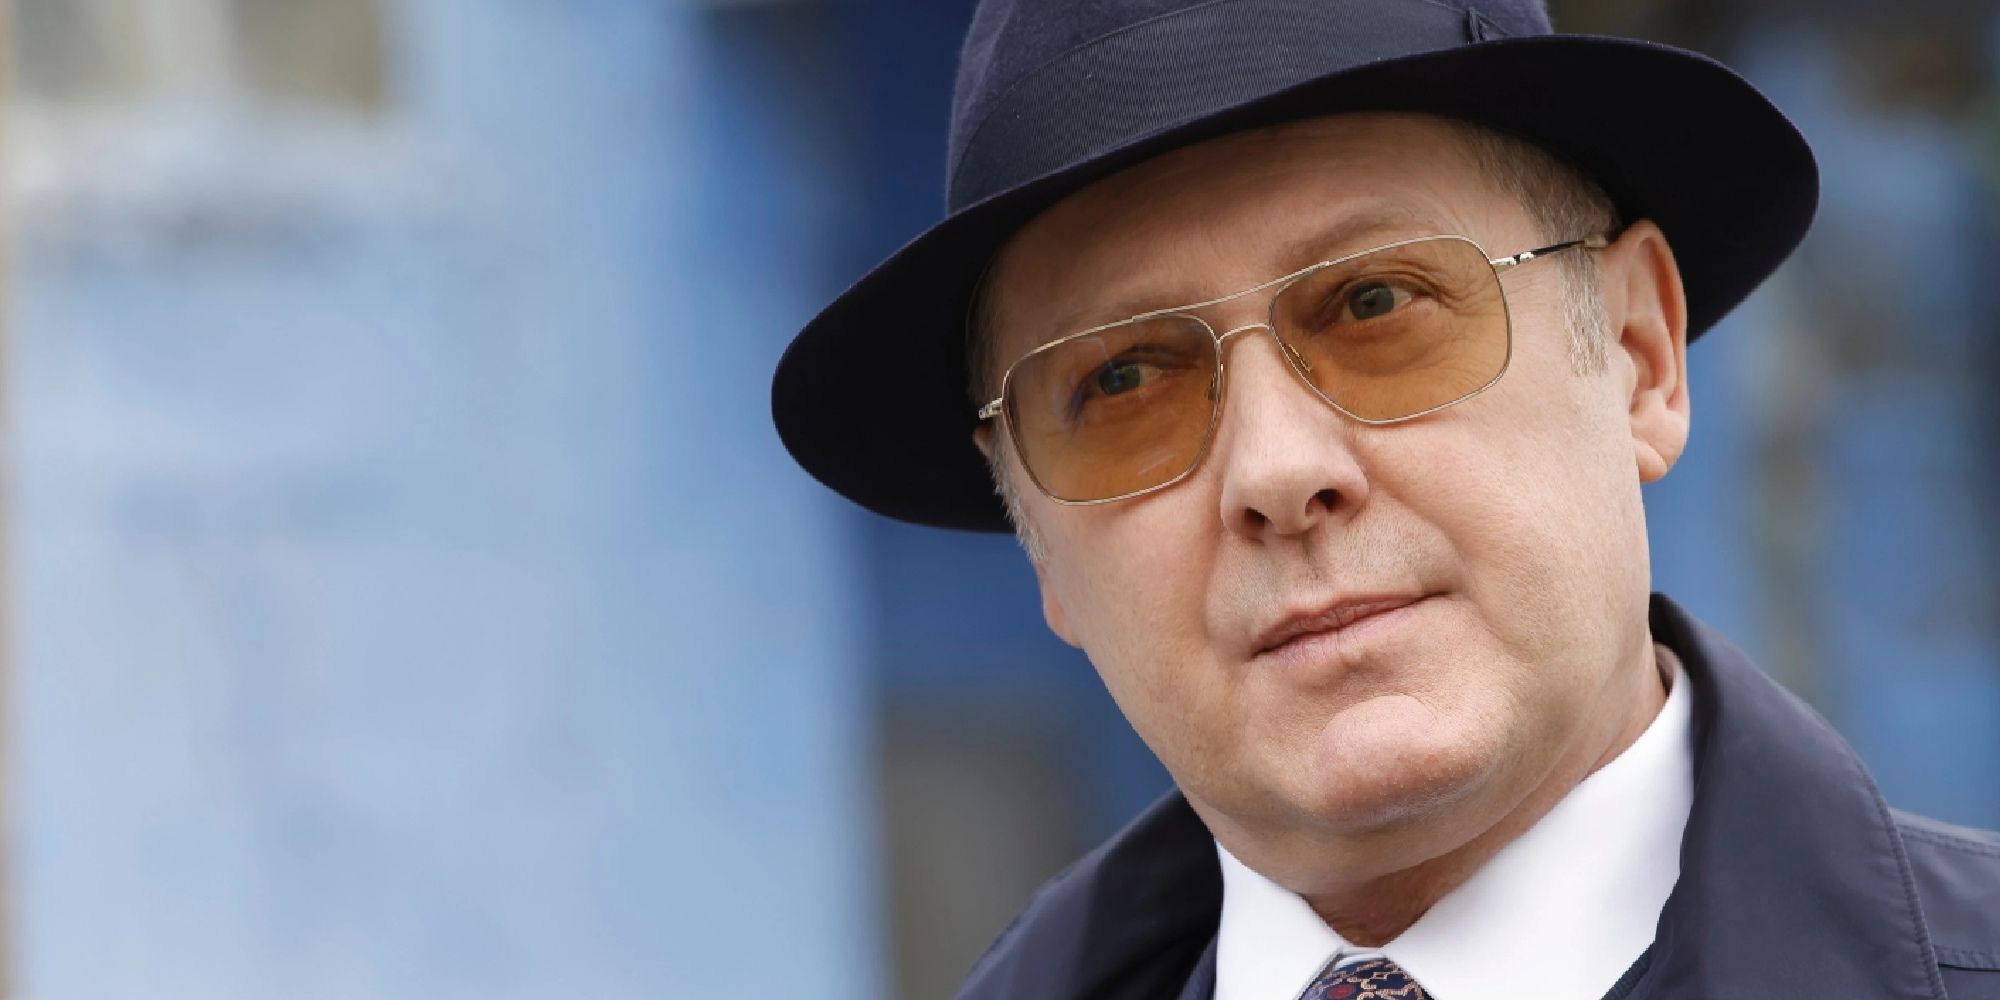 James Spader in The Blacklist wearing a top hat, head cocked.